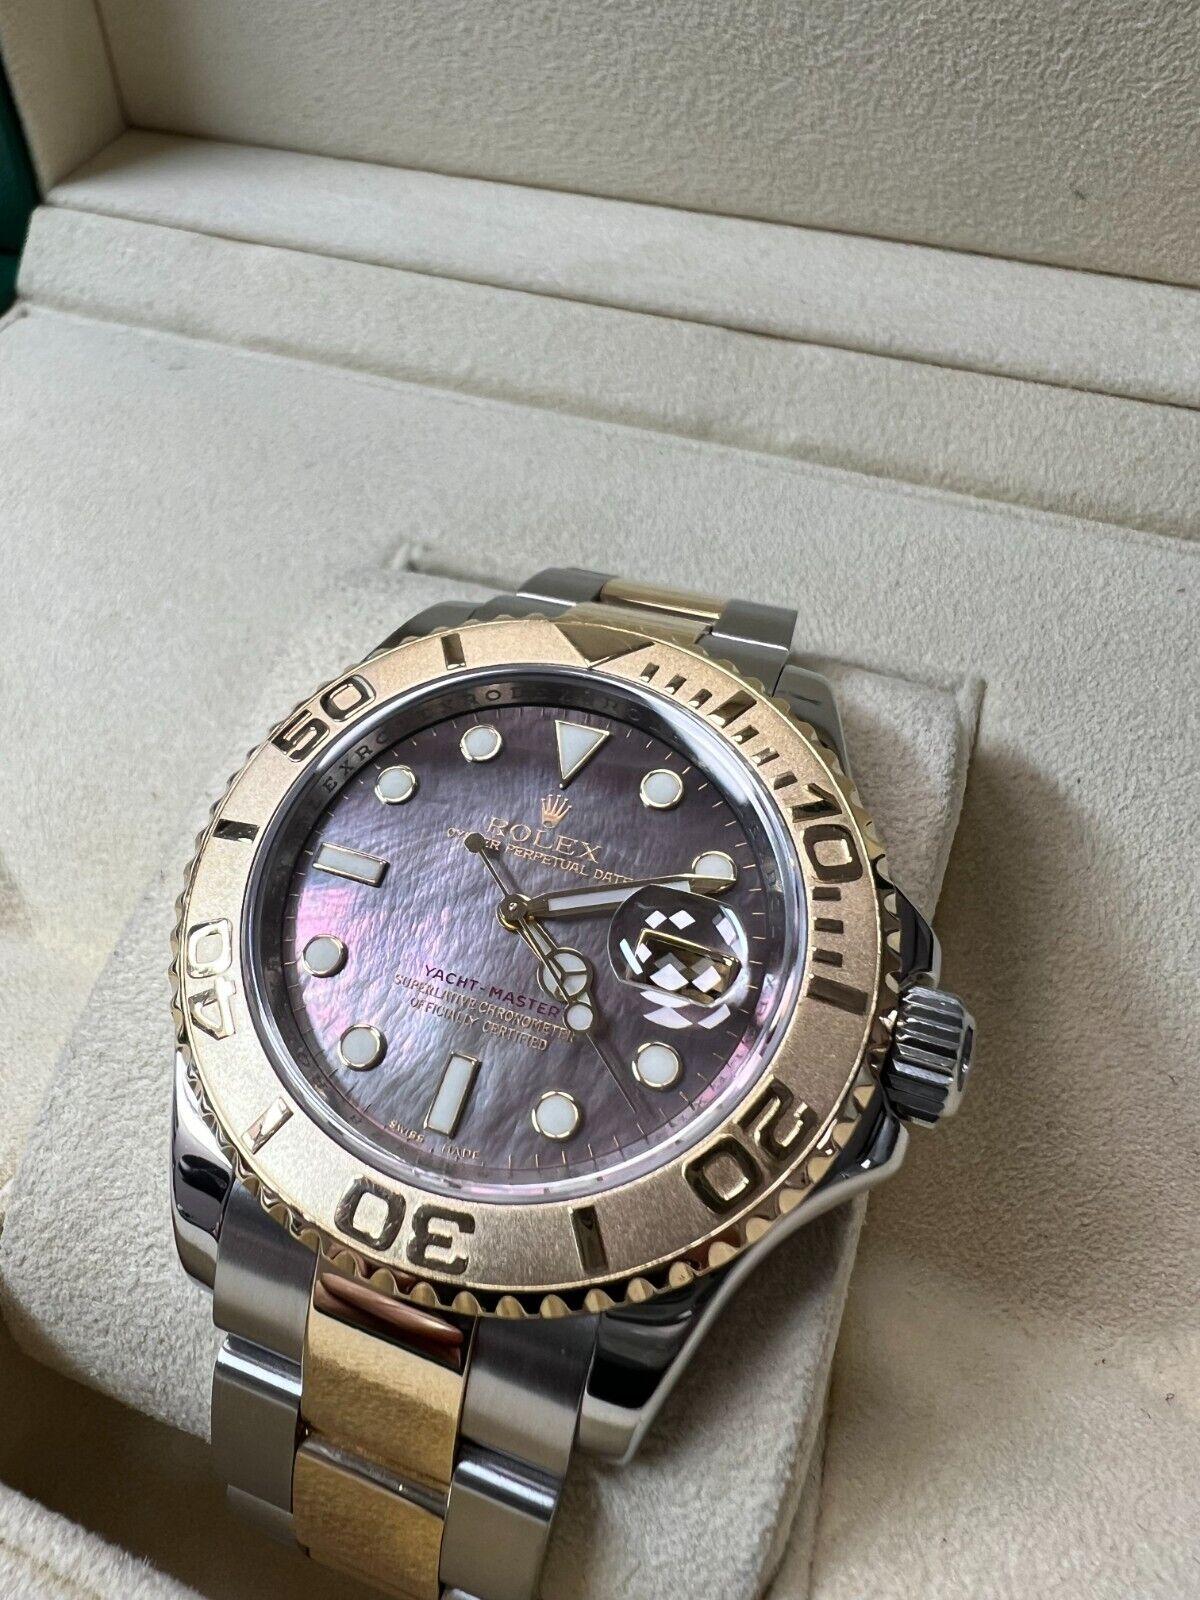 Rolex Yacht Master 16623 Tahitian MOP Dial 18K Gold Stainless Steel In Excellent Condition For Sale In San Diego, CA